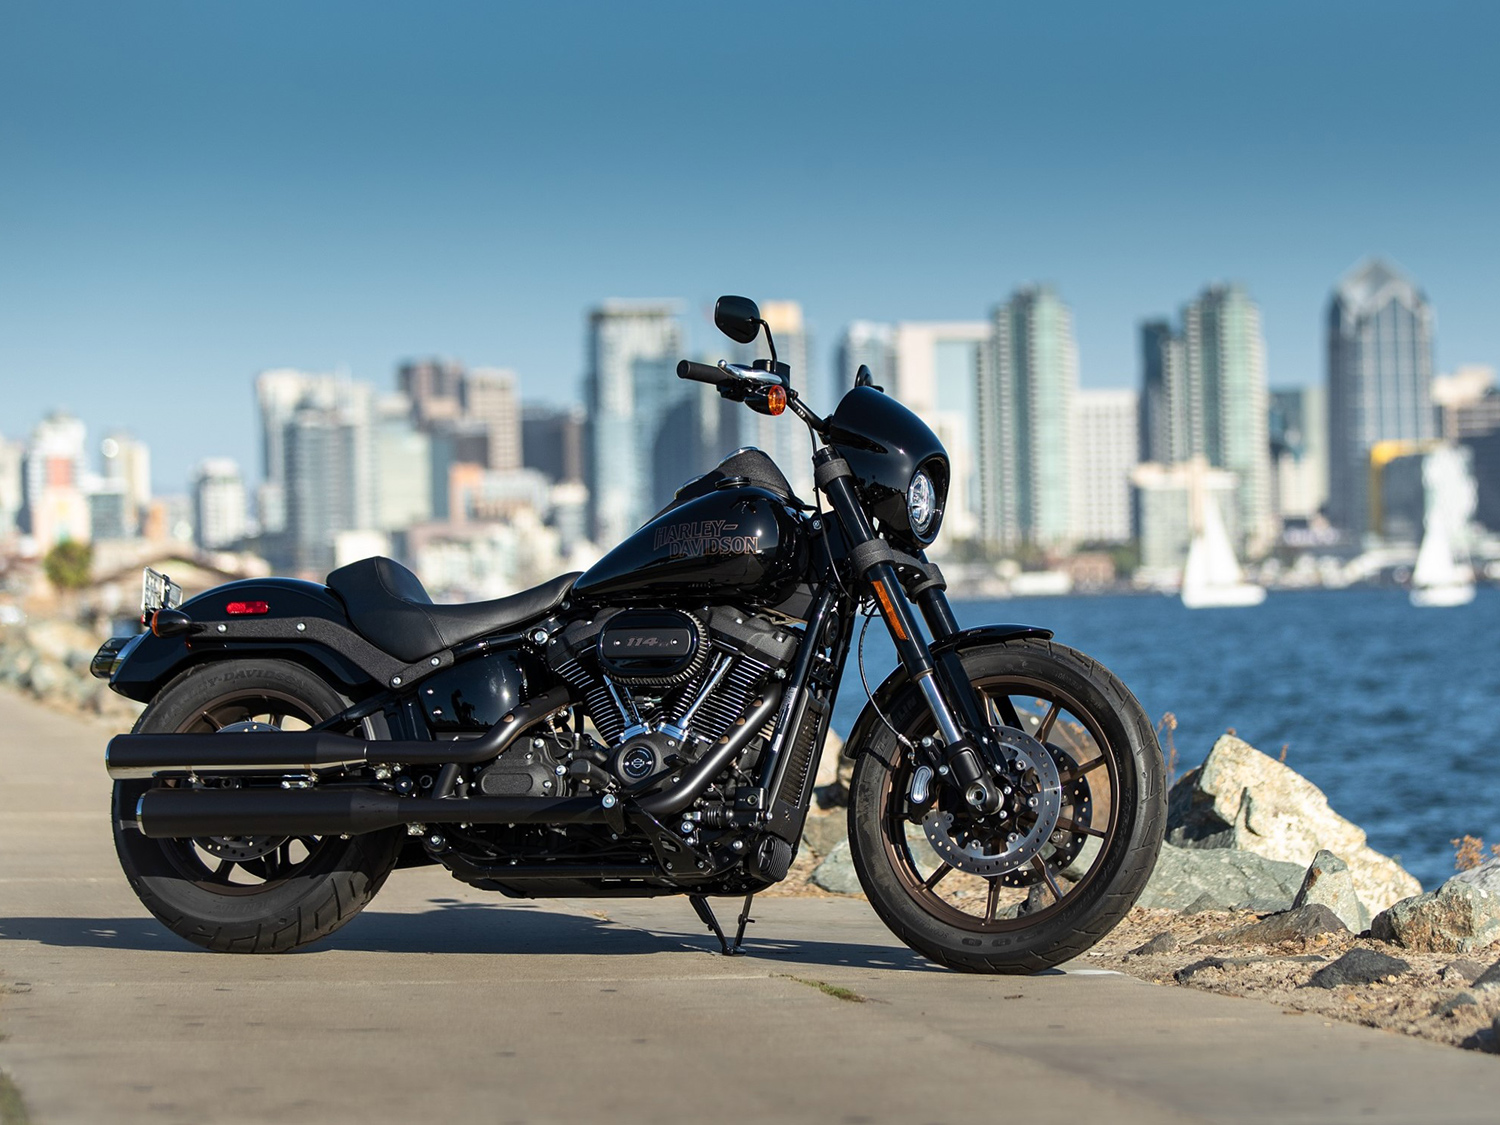 2020 Harley Davidson Low Rider S First Ride Review Cycle World